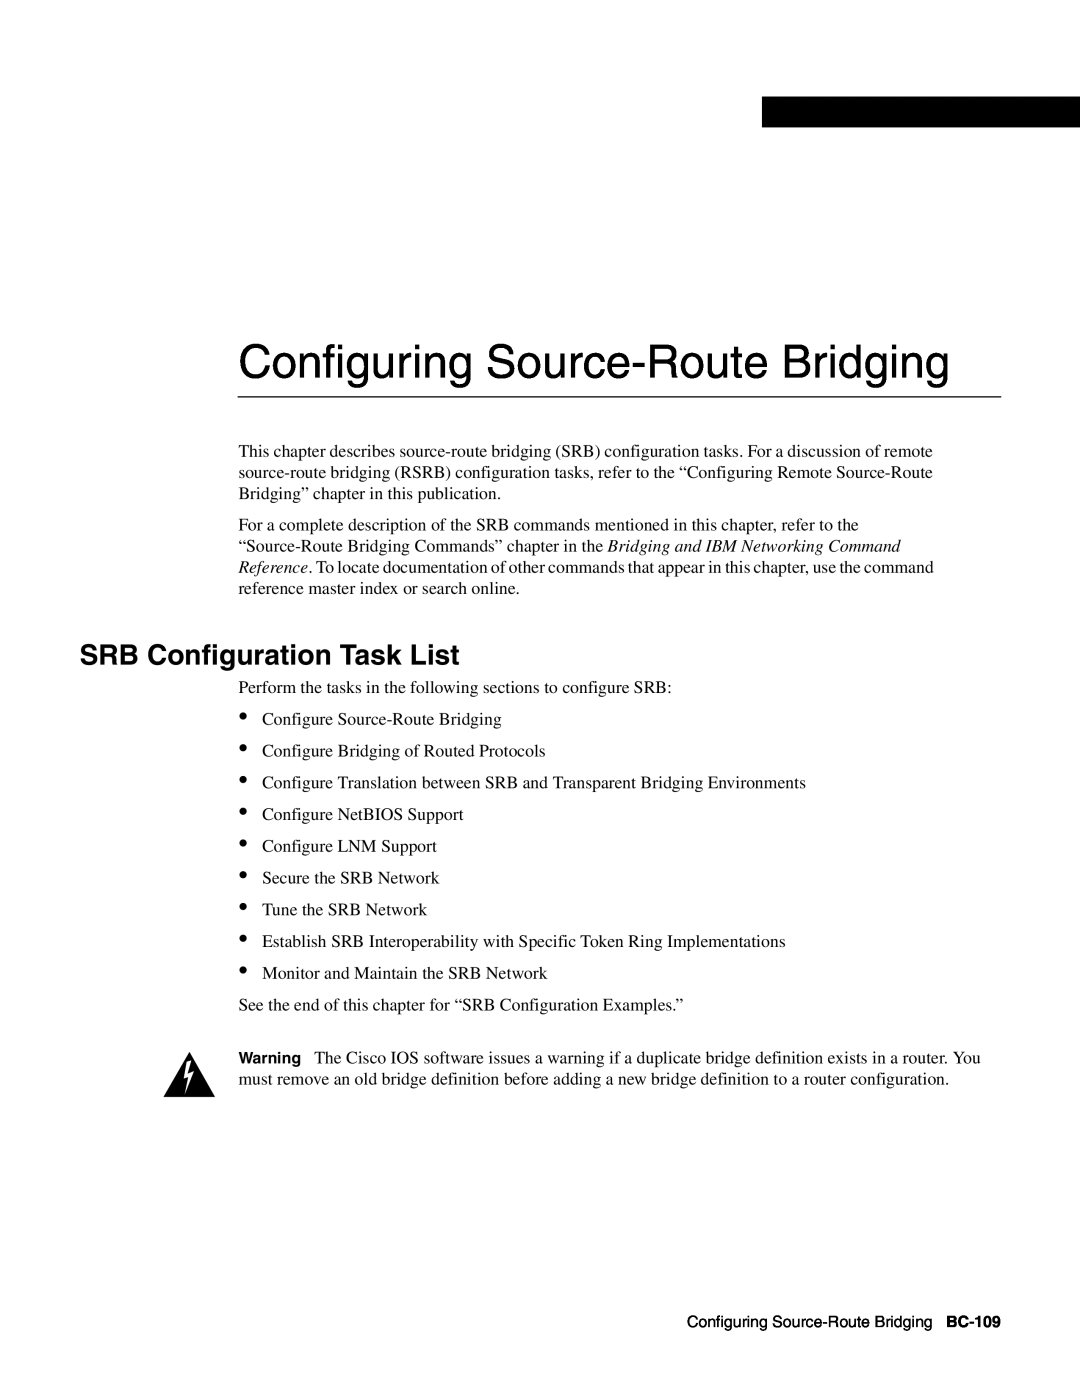 Cisco Systems BC-109 manual SRB Configuration Task List, Configuring Source-Route Bridging 